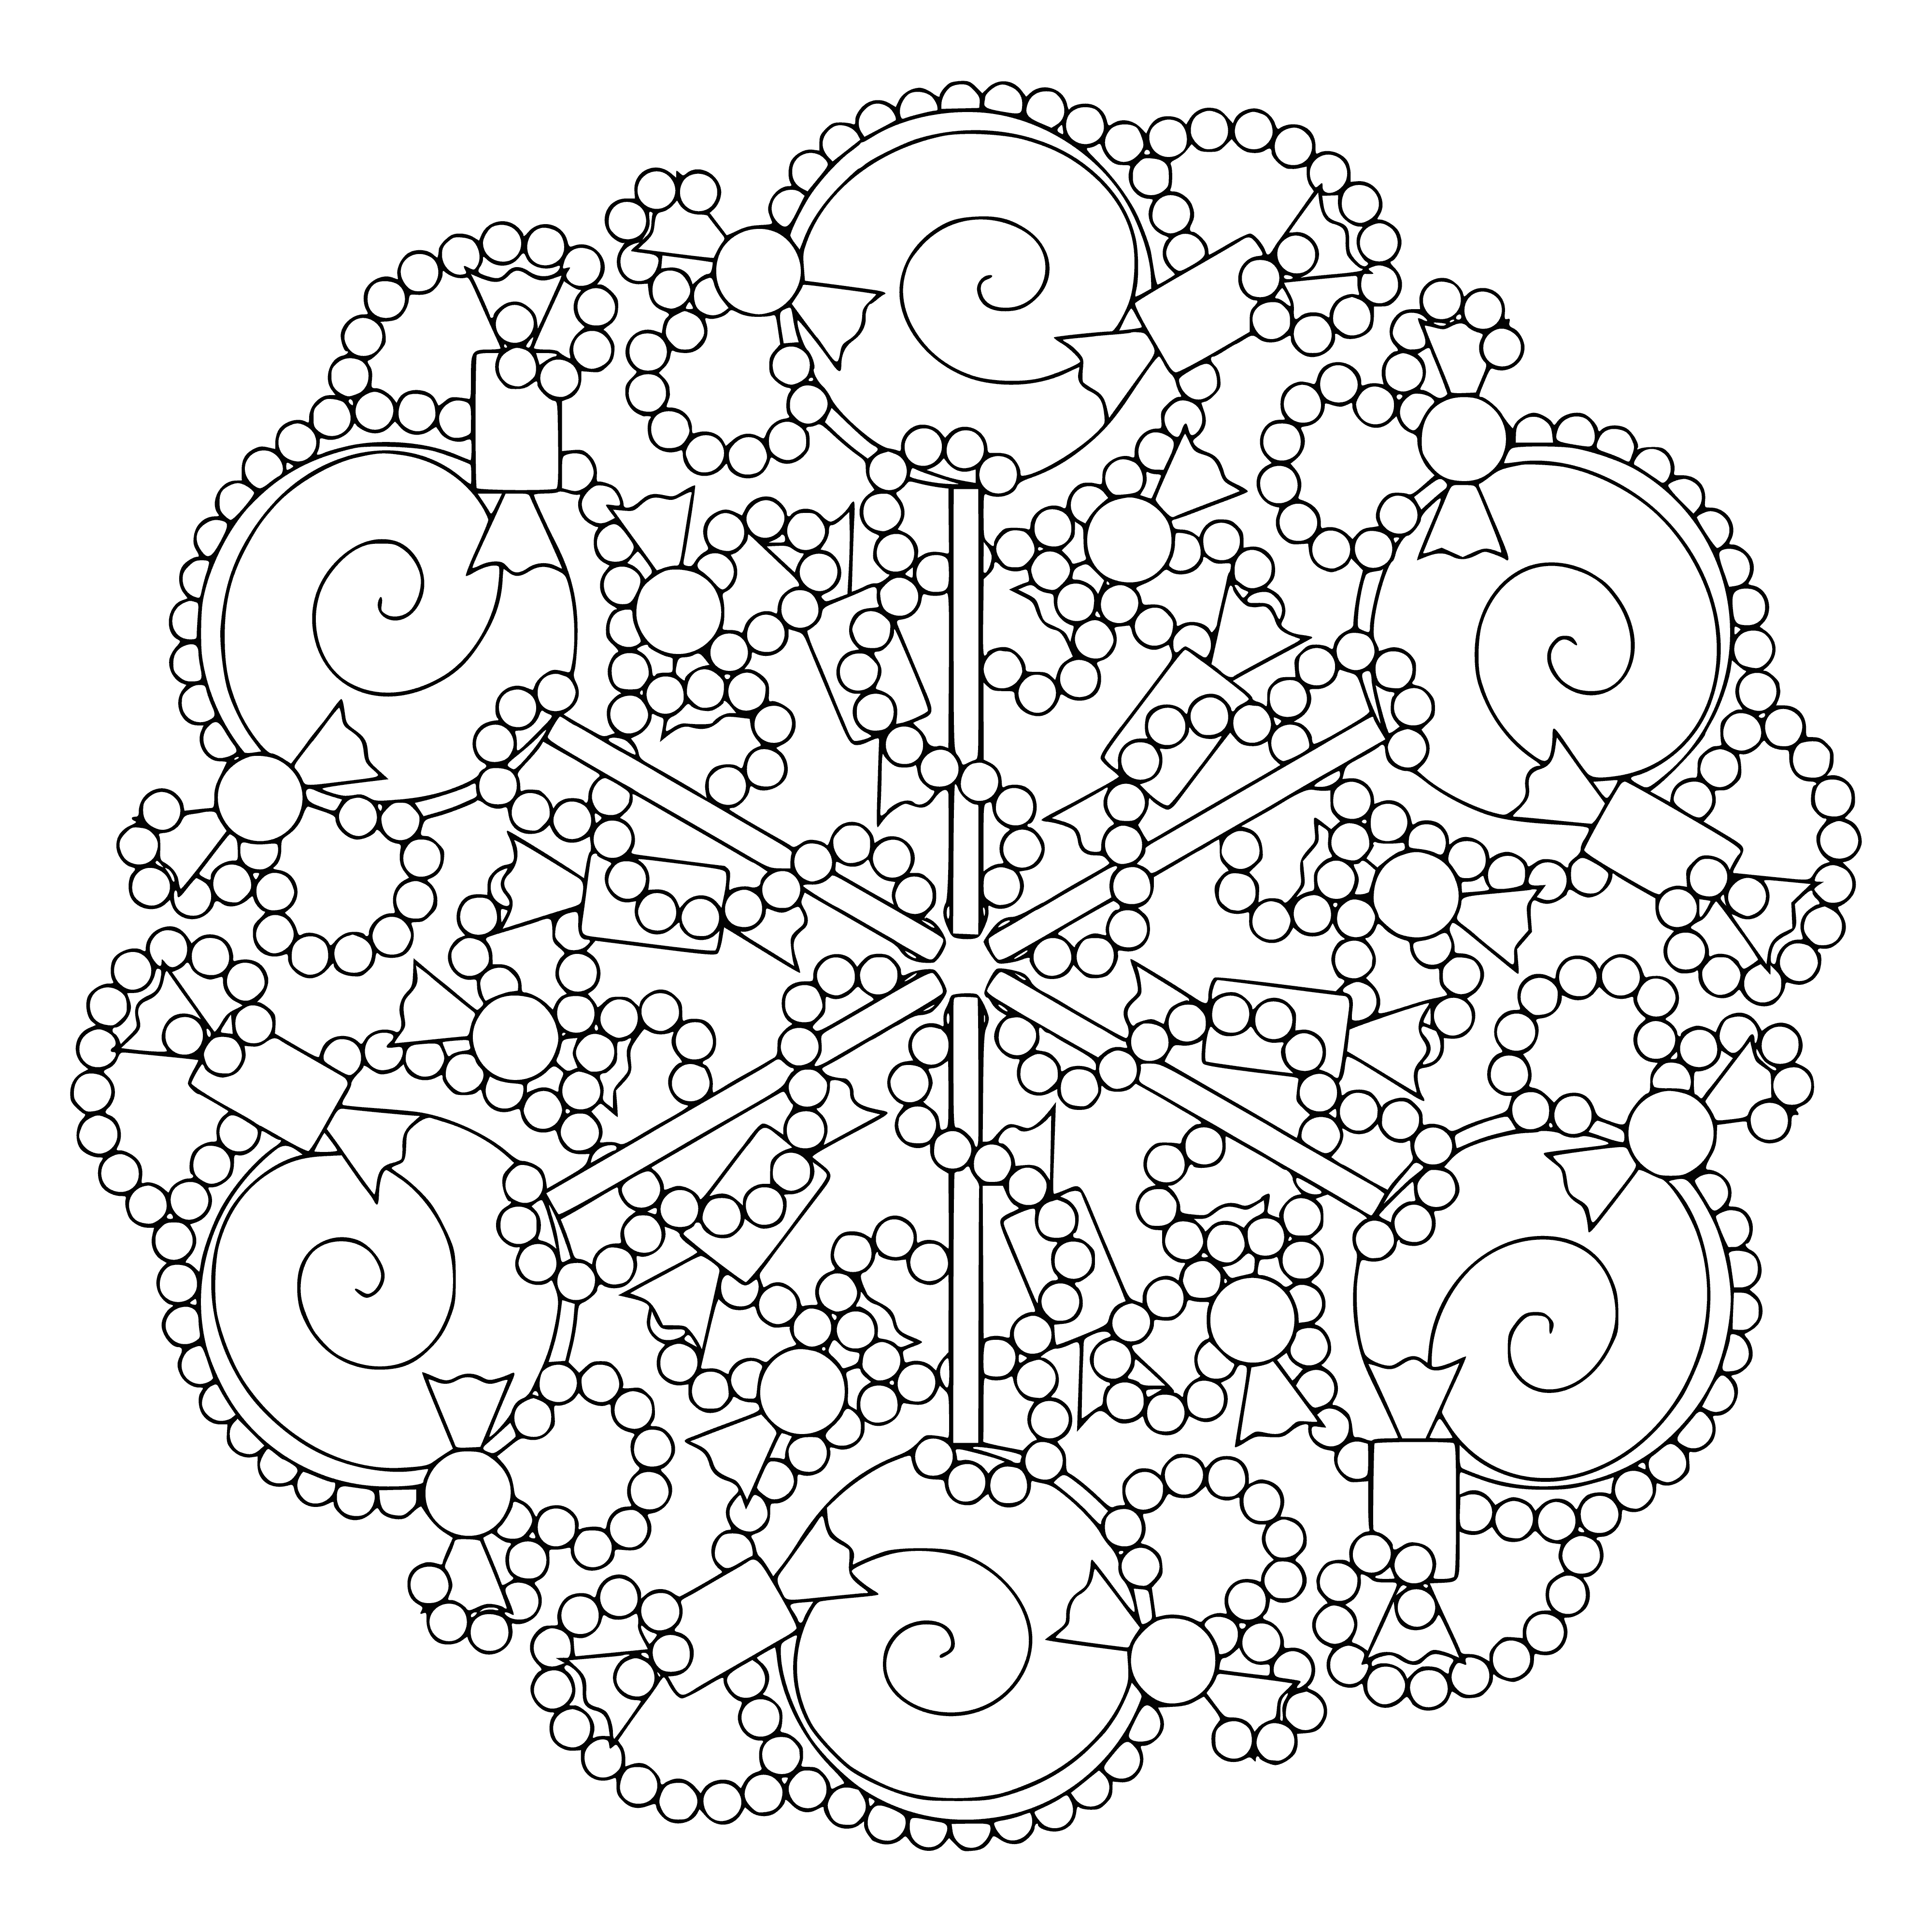 coloring page: Design w/ circular patterns & symbols, symmetrical or asymmetric. Often brightly colored. Symbolizing life's journey & connection to the universe.